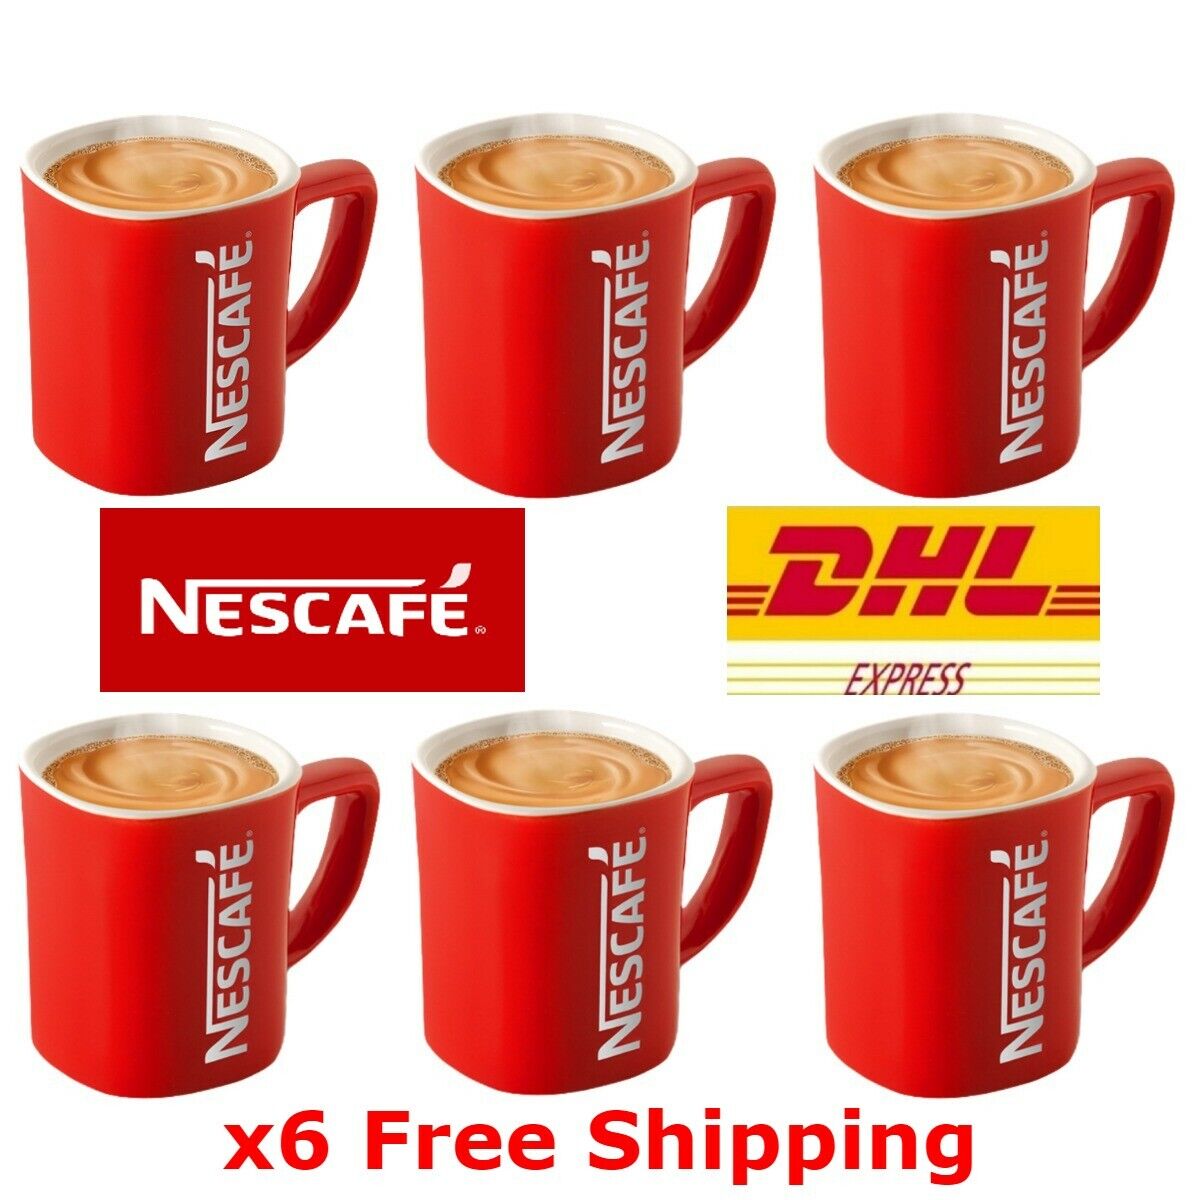 Nescafe Red Cup Coffee Ceramic Mug 8Oz Vintage Classic Collectible Gift x6 x12